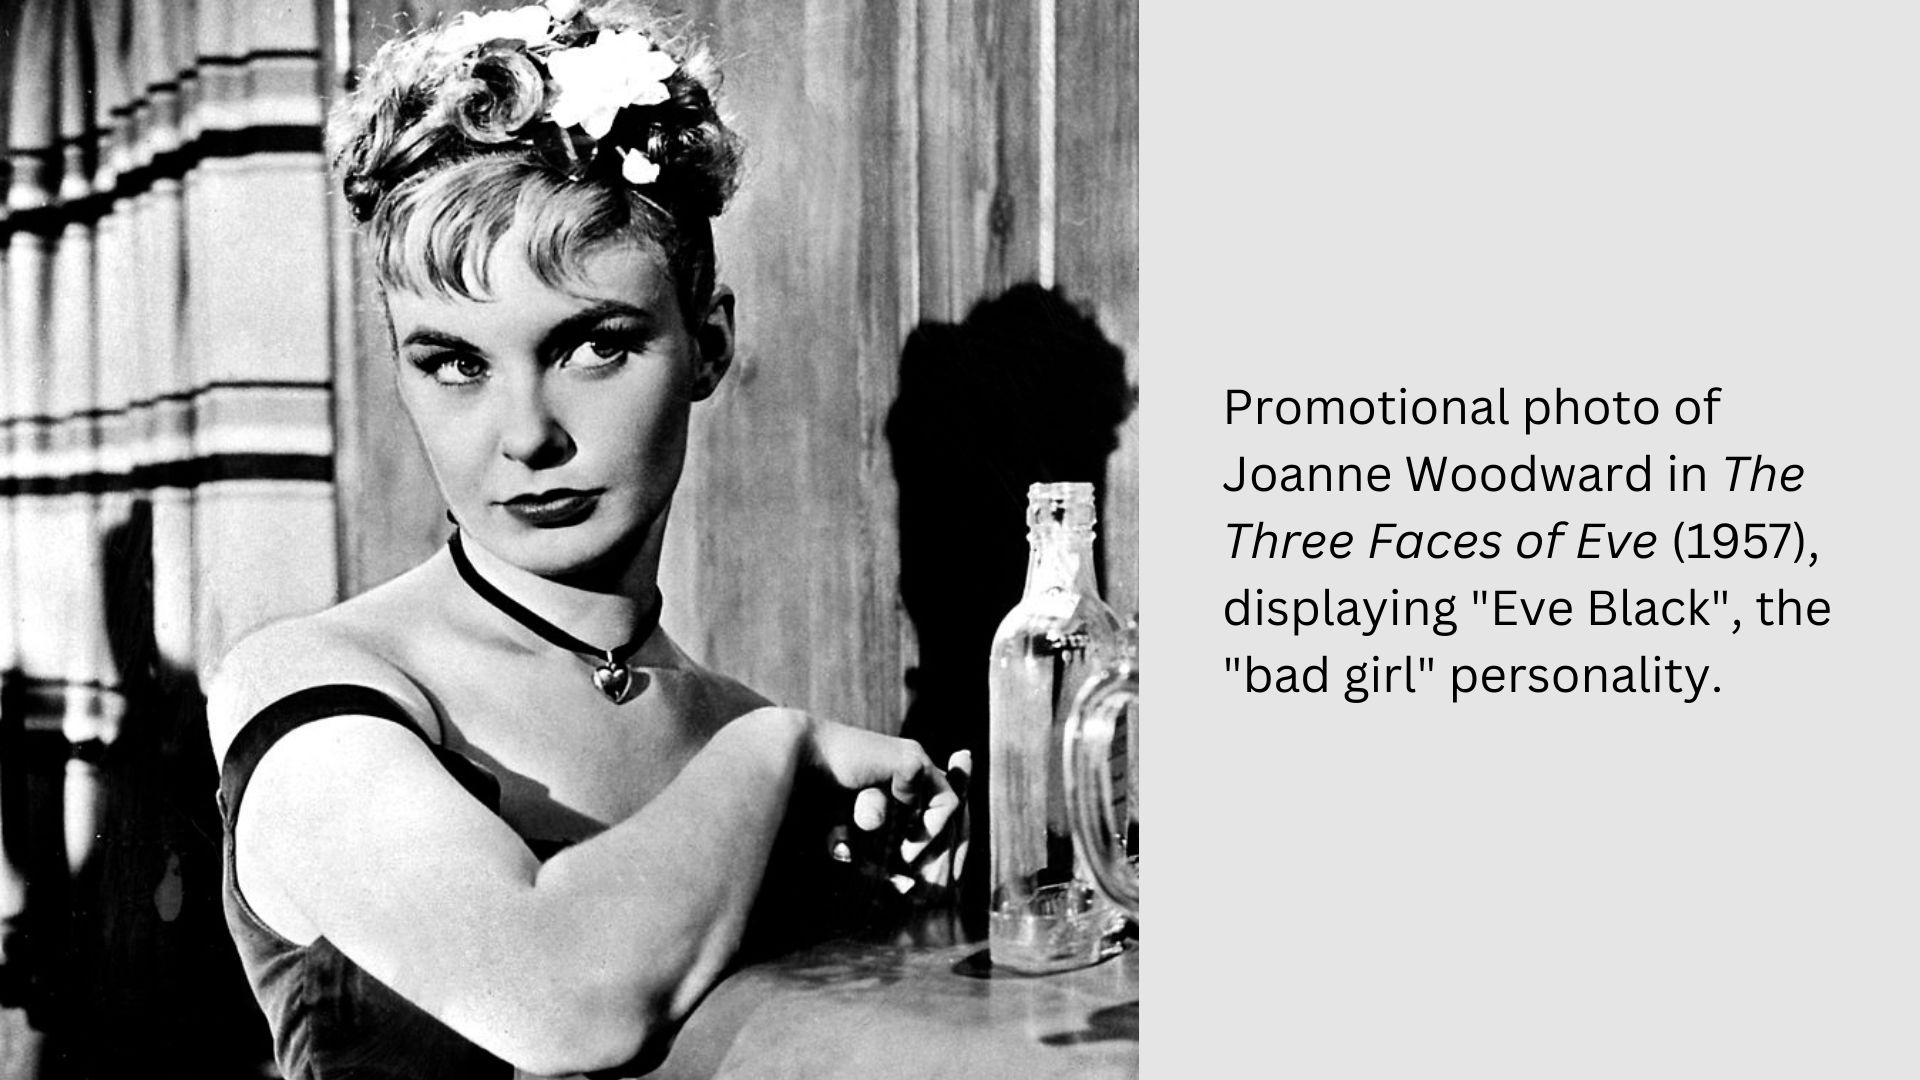 Promotional photo of Joanne Woodward in The Three Faces of Eve (1957), displaying "Eve Black", the "bad girl" personality.